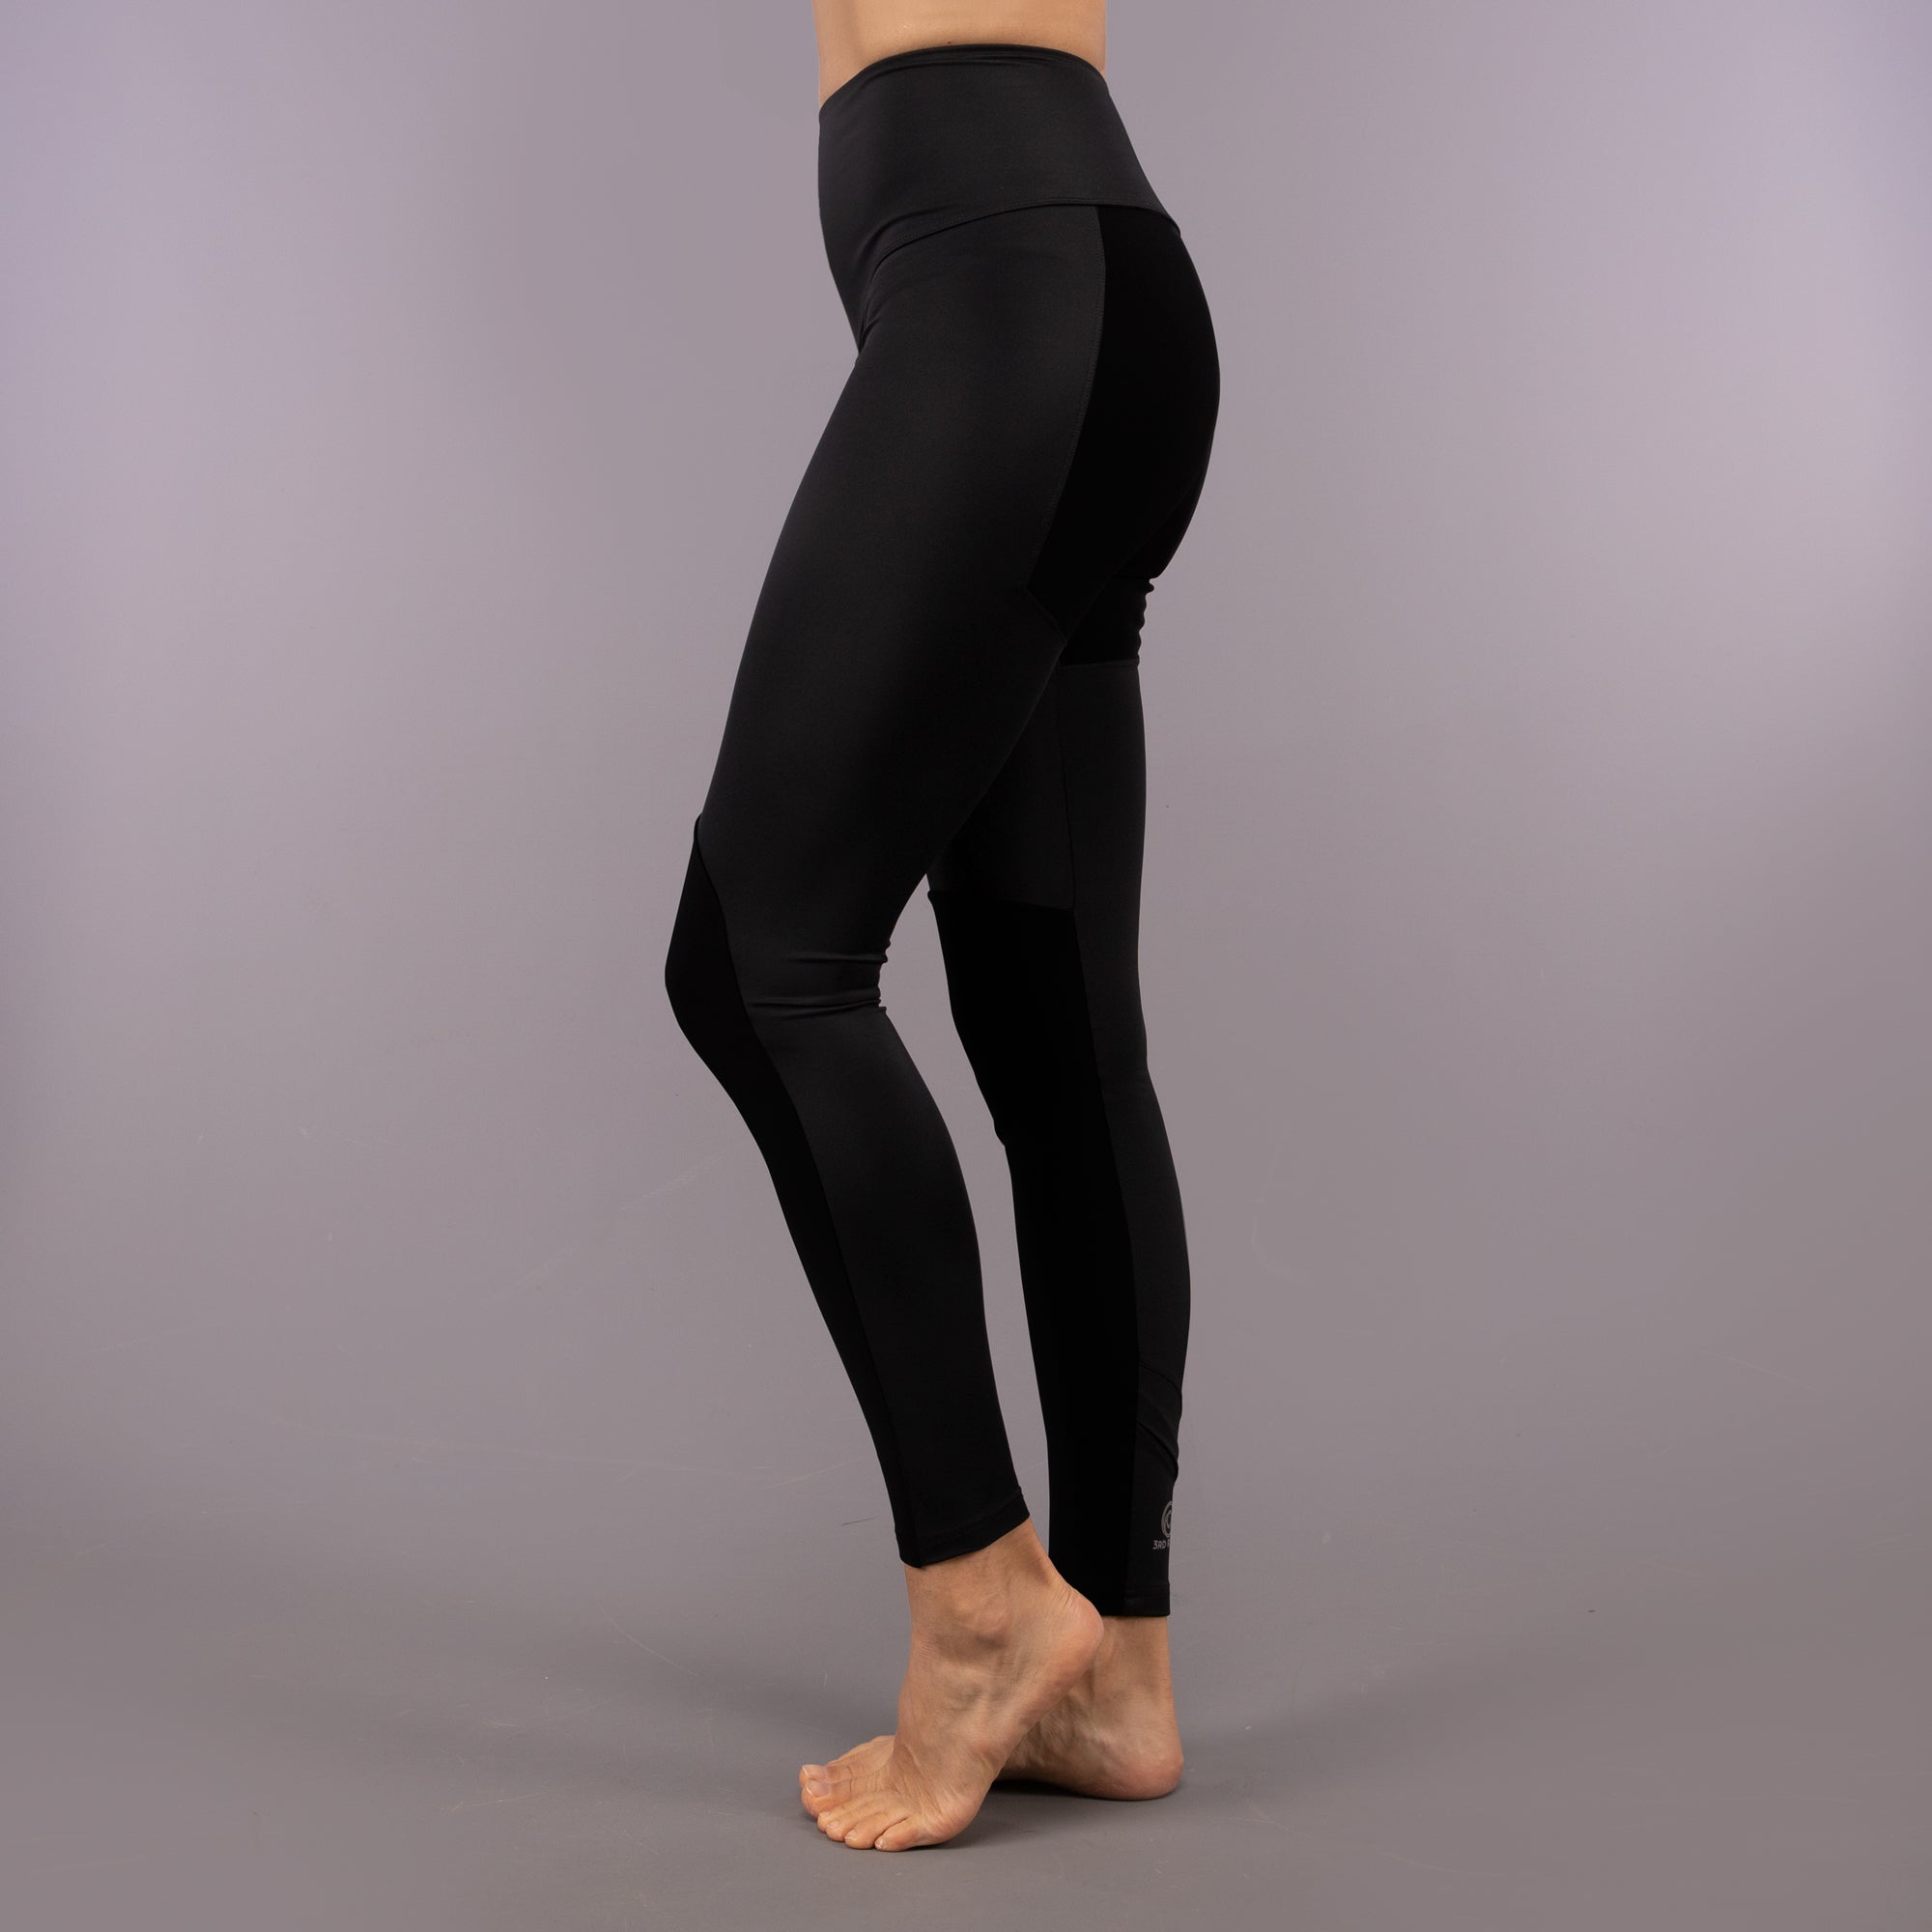 MATILDA Leggings | Abrasion Resistant & Hard Wearing | 3RD ROCK Clothing -  Jessica is 5ft 7" with a 32" inseam, 30" waist and 39" hip and wears a 10. F